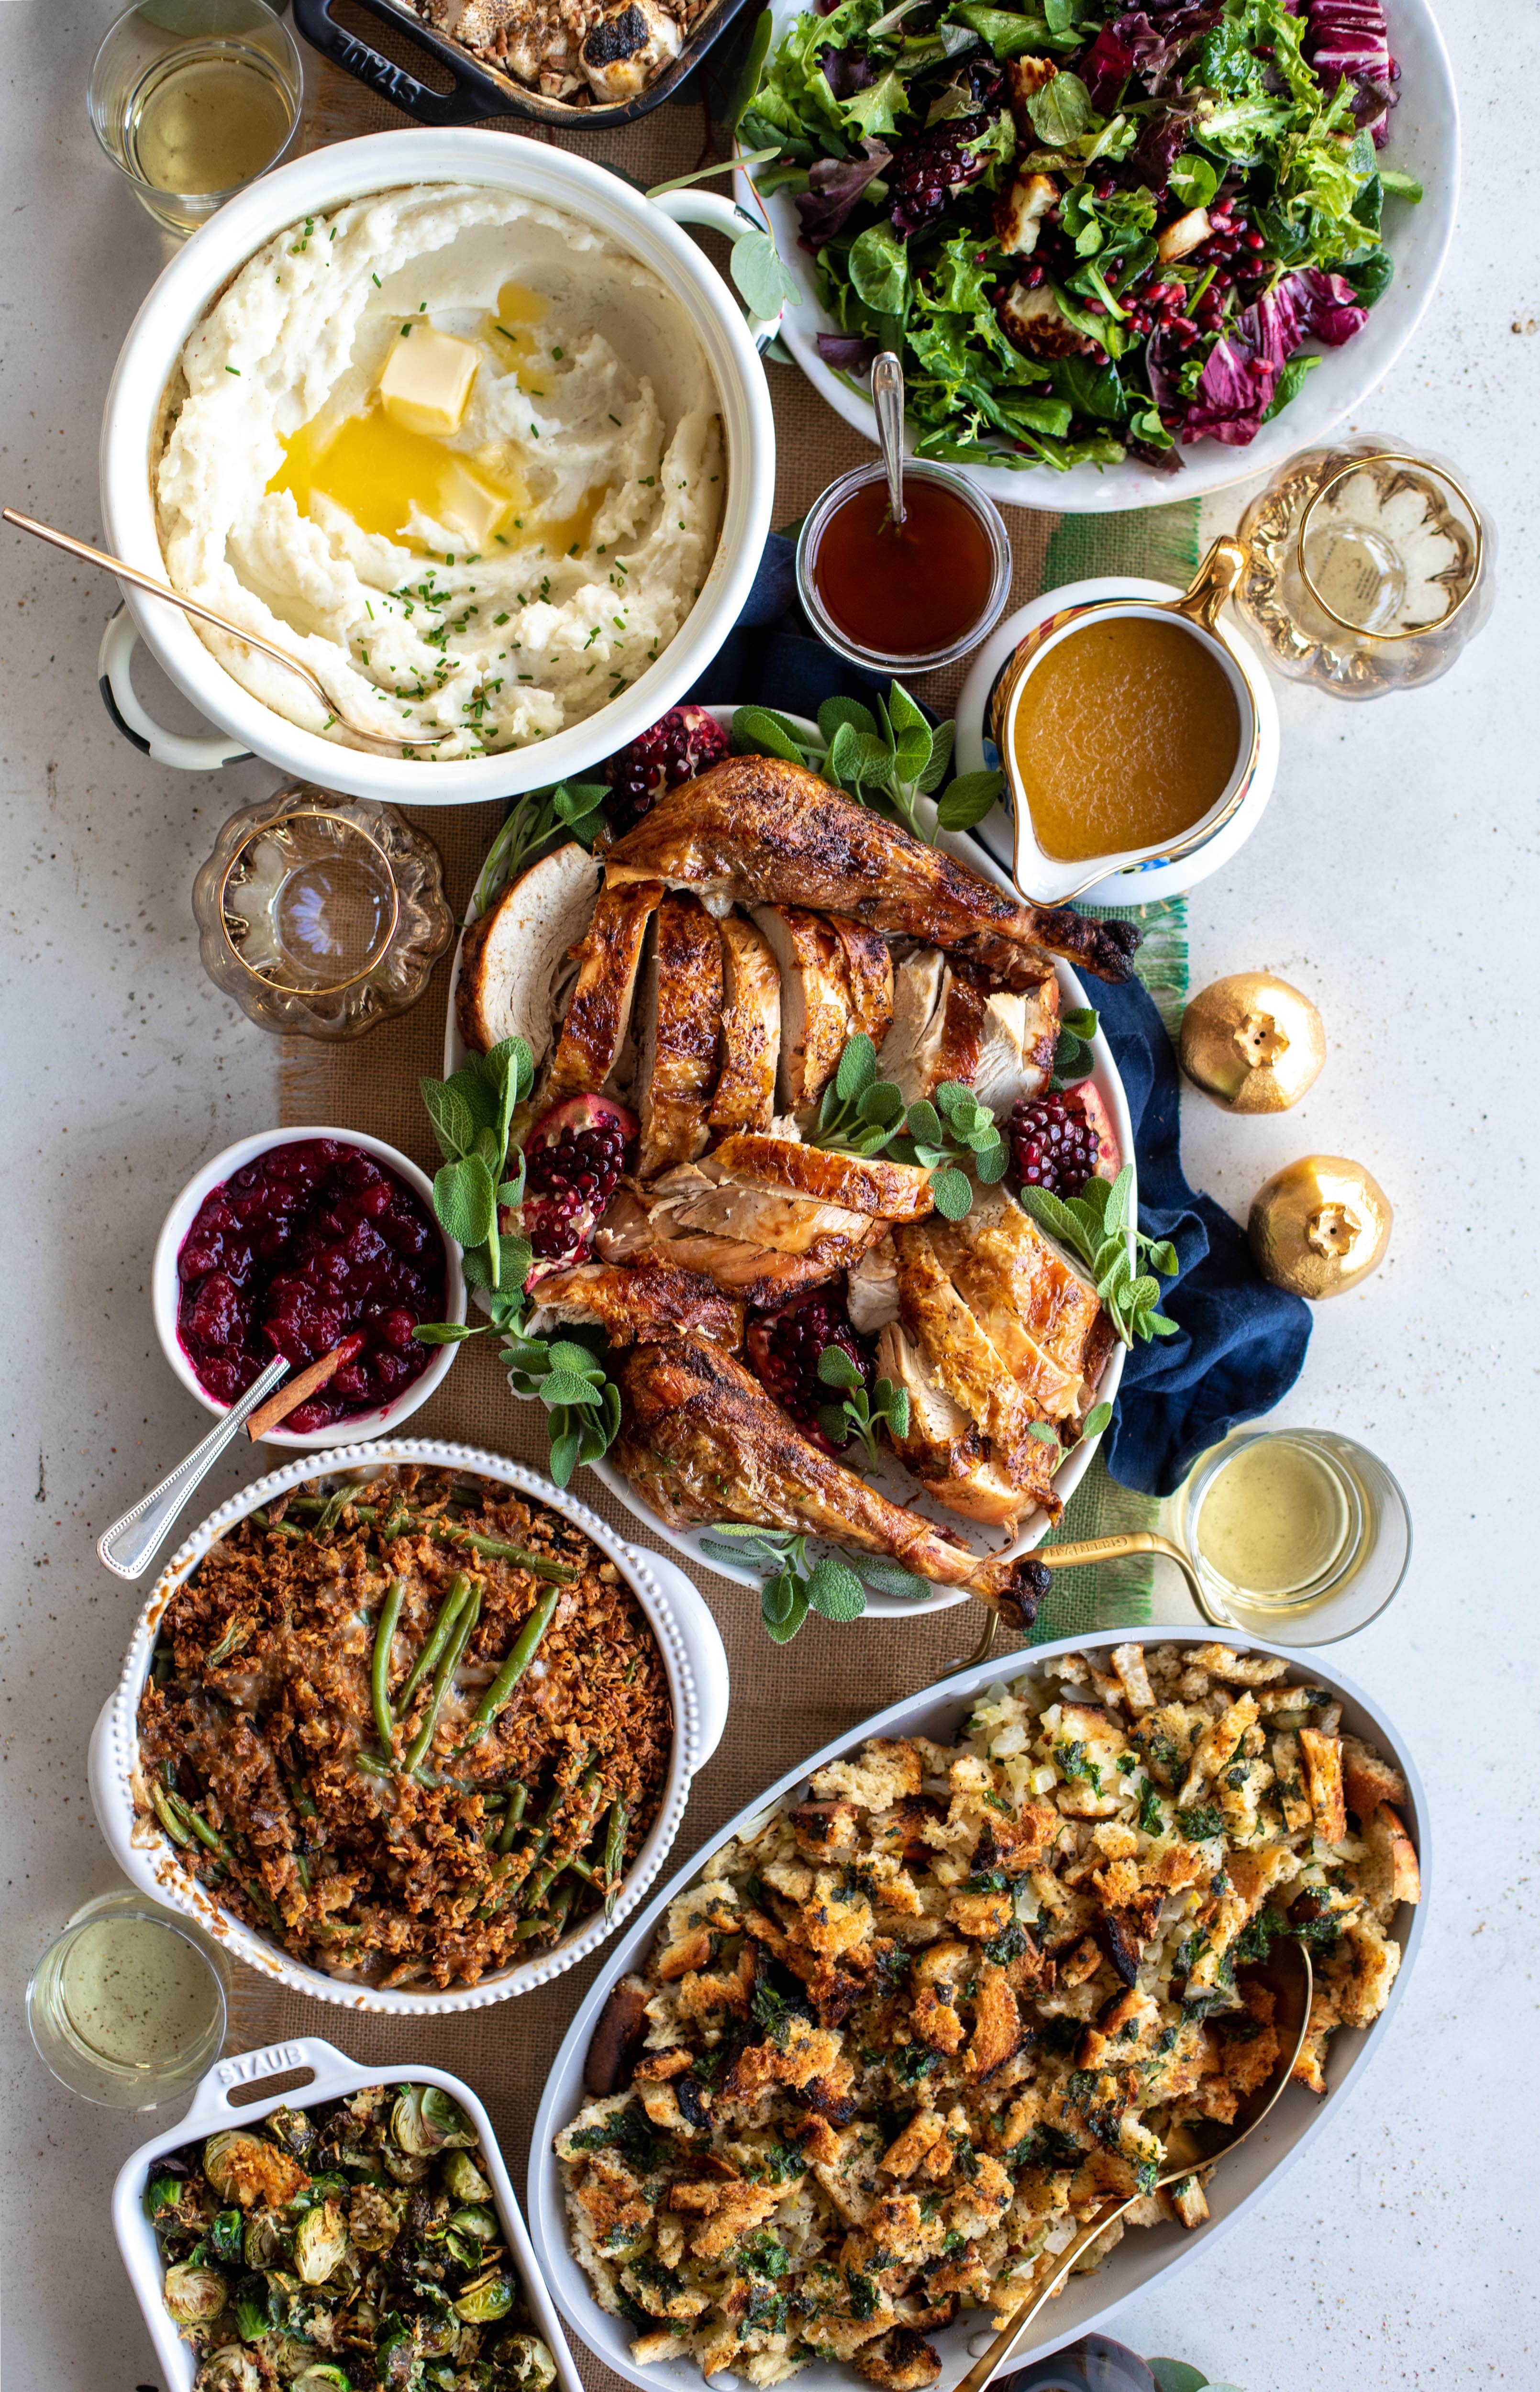 Right here I'm sharing the best thanksgiving recipes you can find! Over 100 of my favorite recipes from salads and apps to dessert and cocktails.